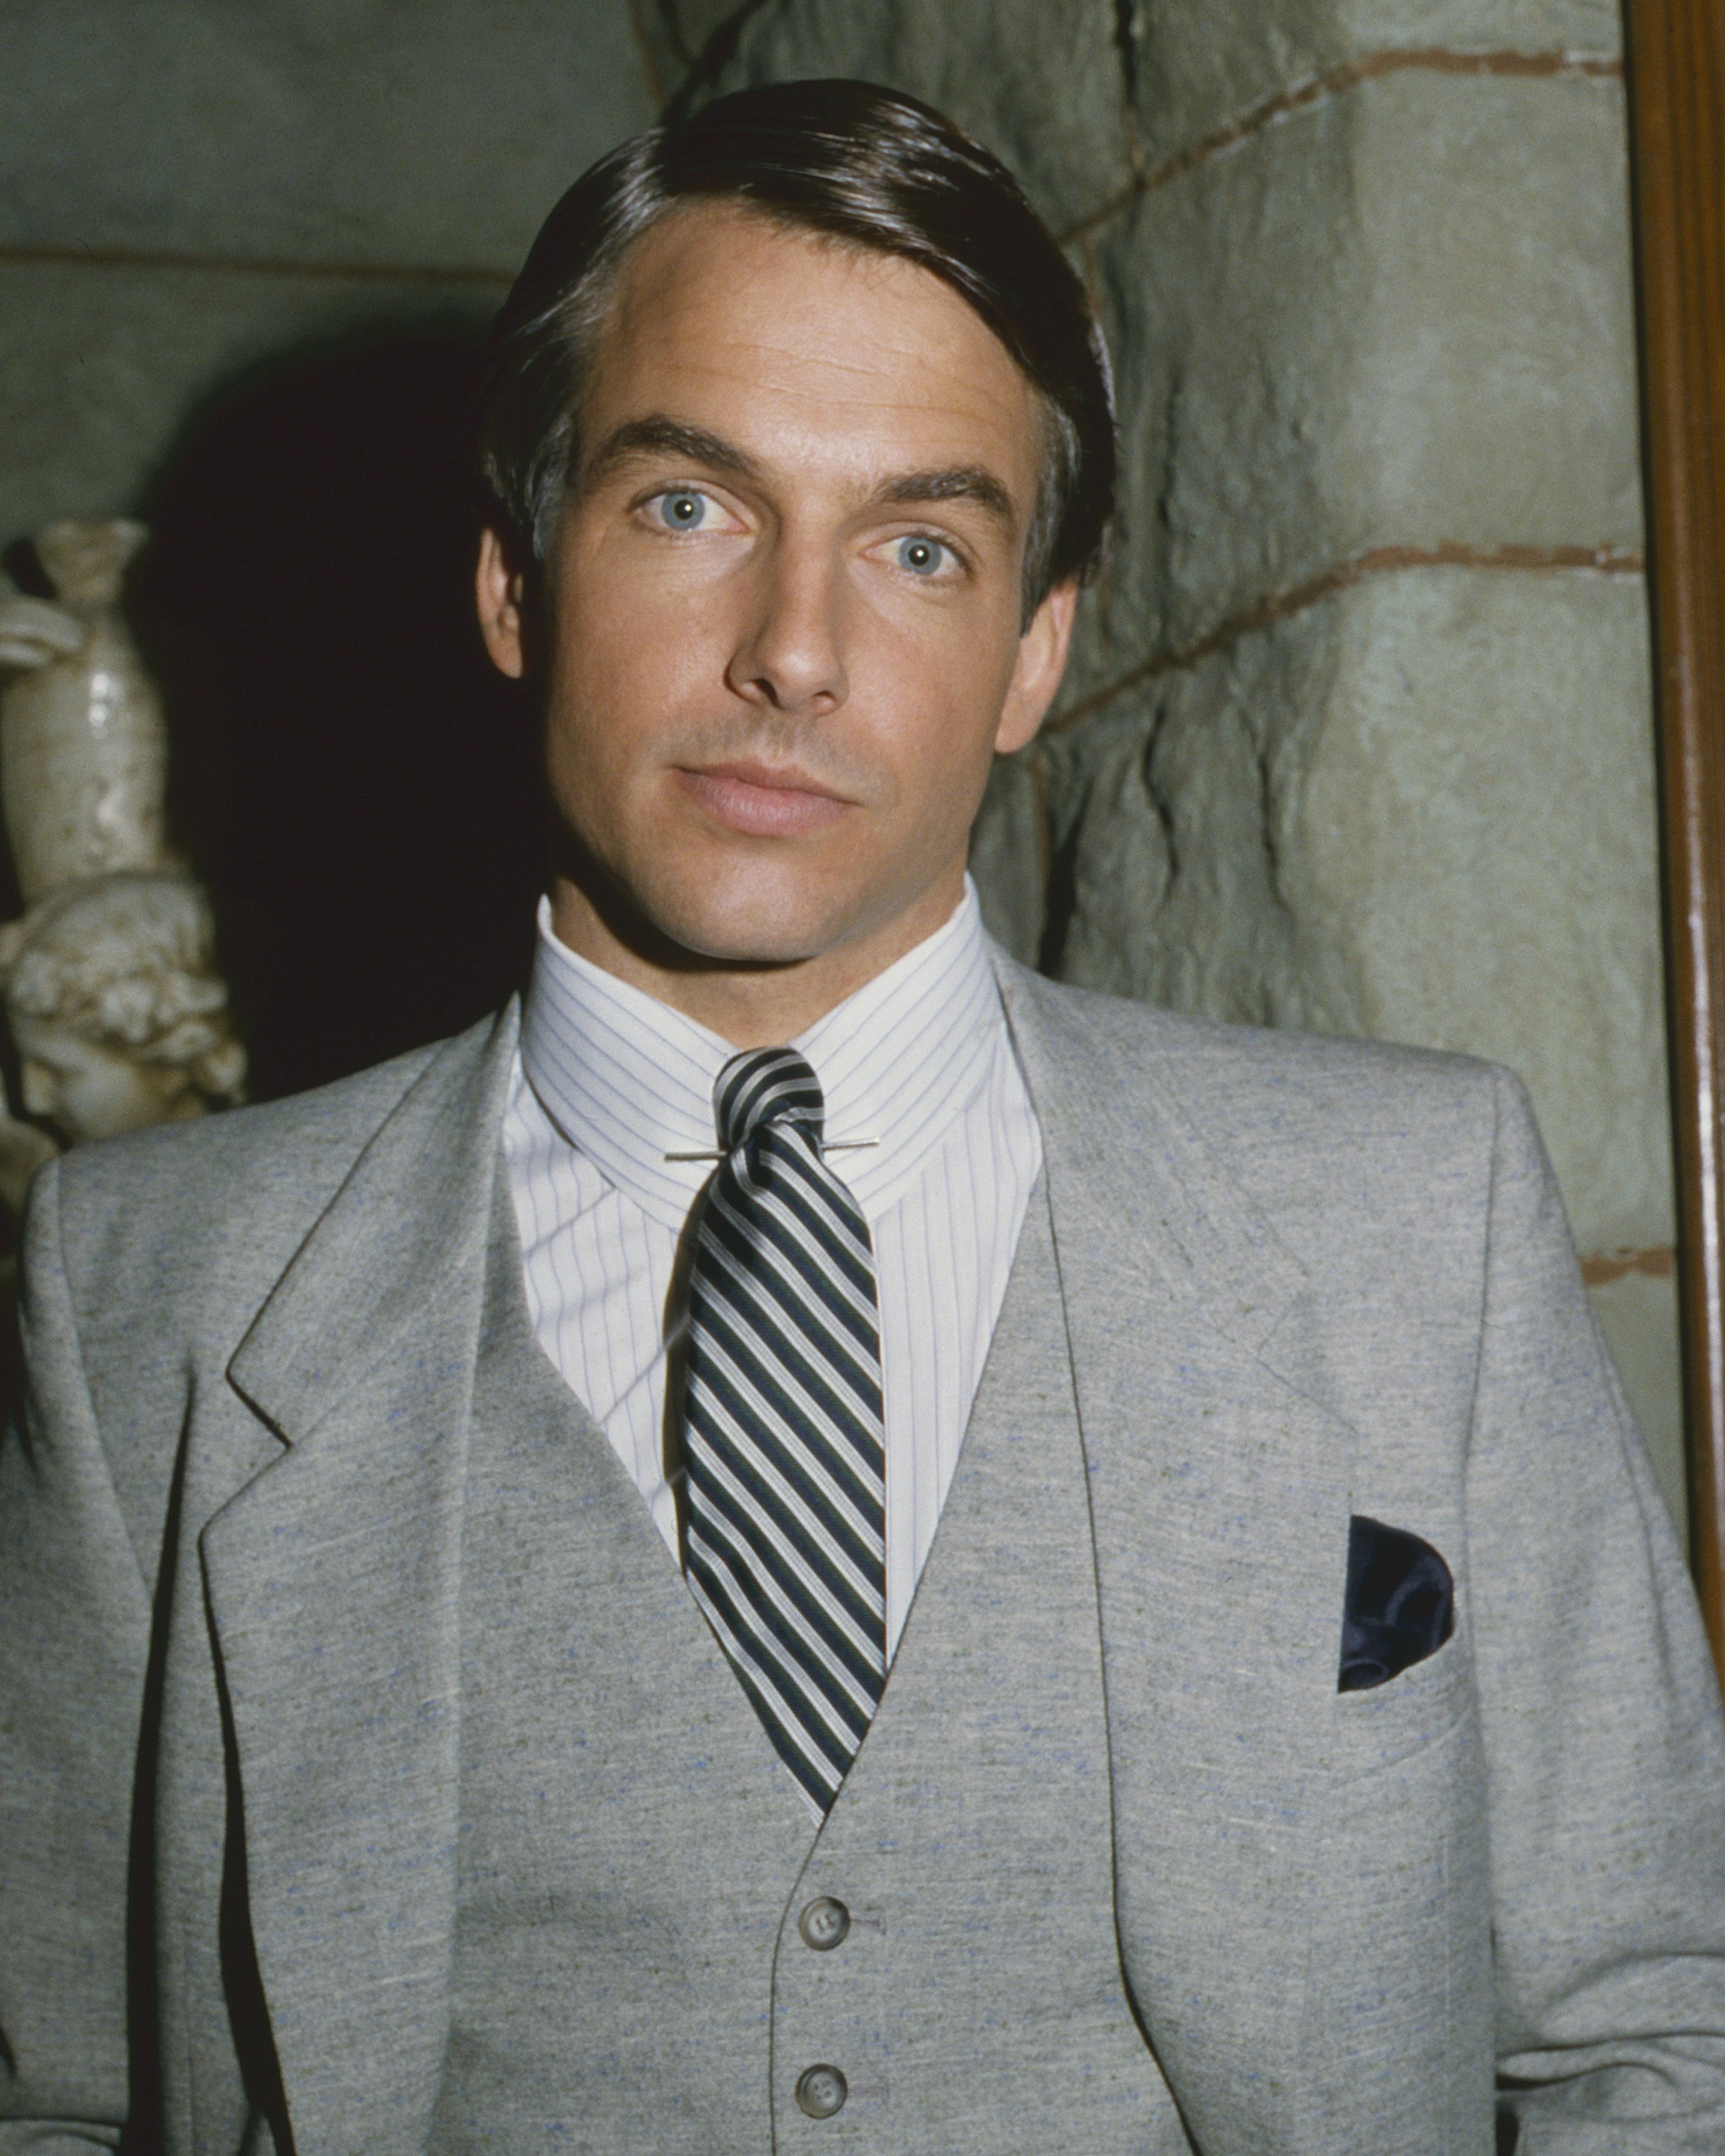 Mark Harmon photographed for the TV show "Flamingo Road" in 1982".  |  Source: Getty Images 